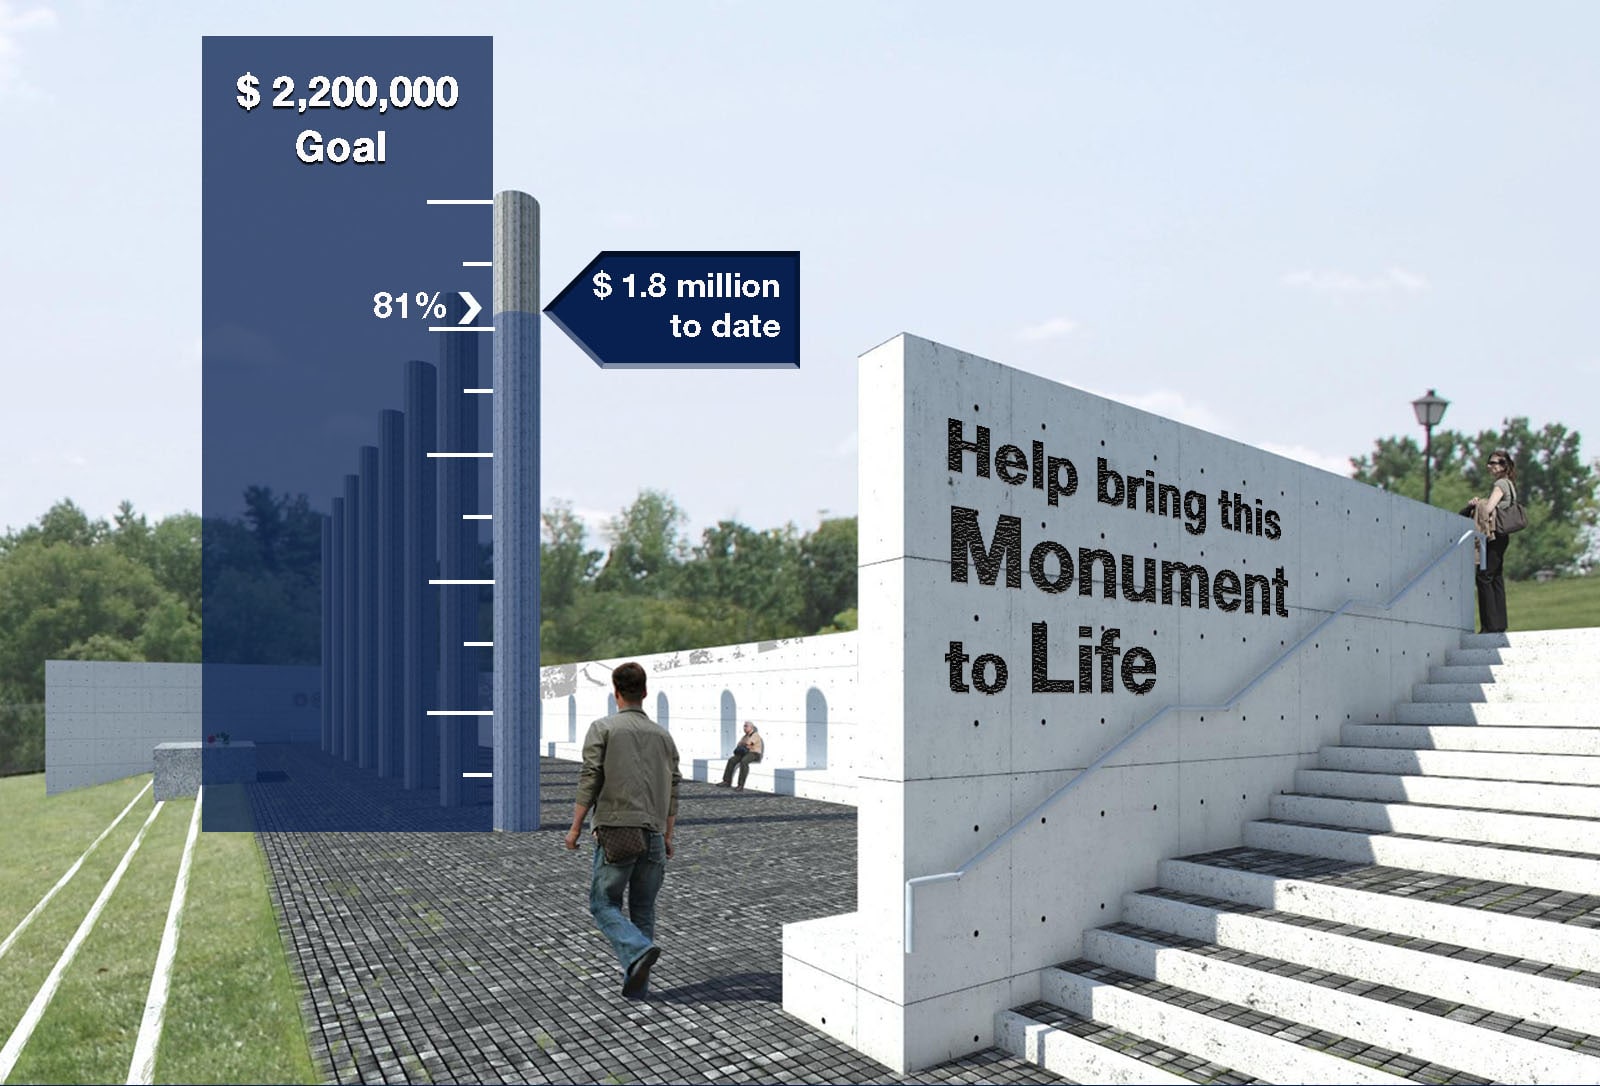 Illustration of monument with donation goals